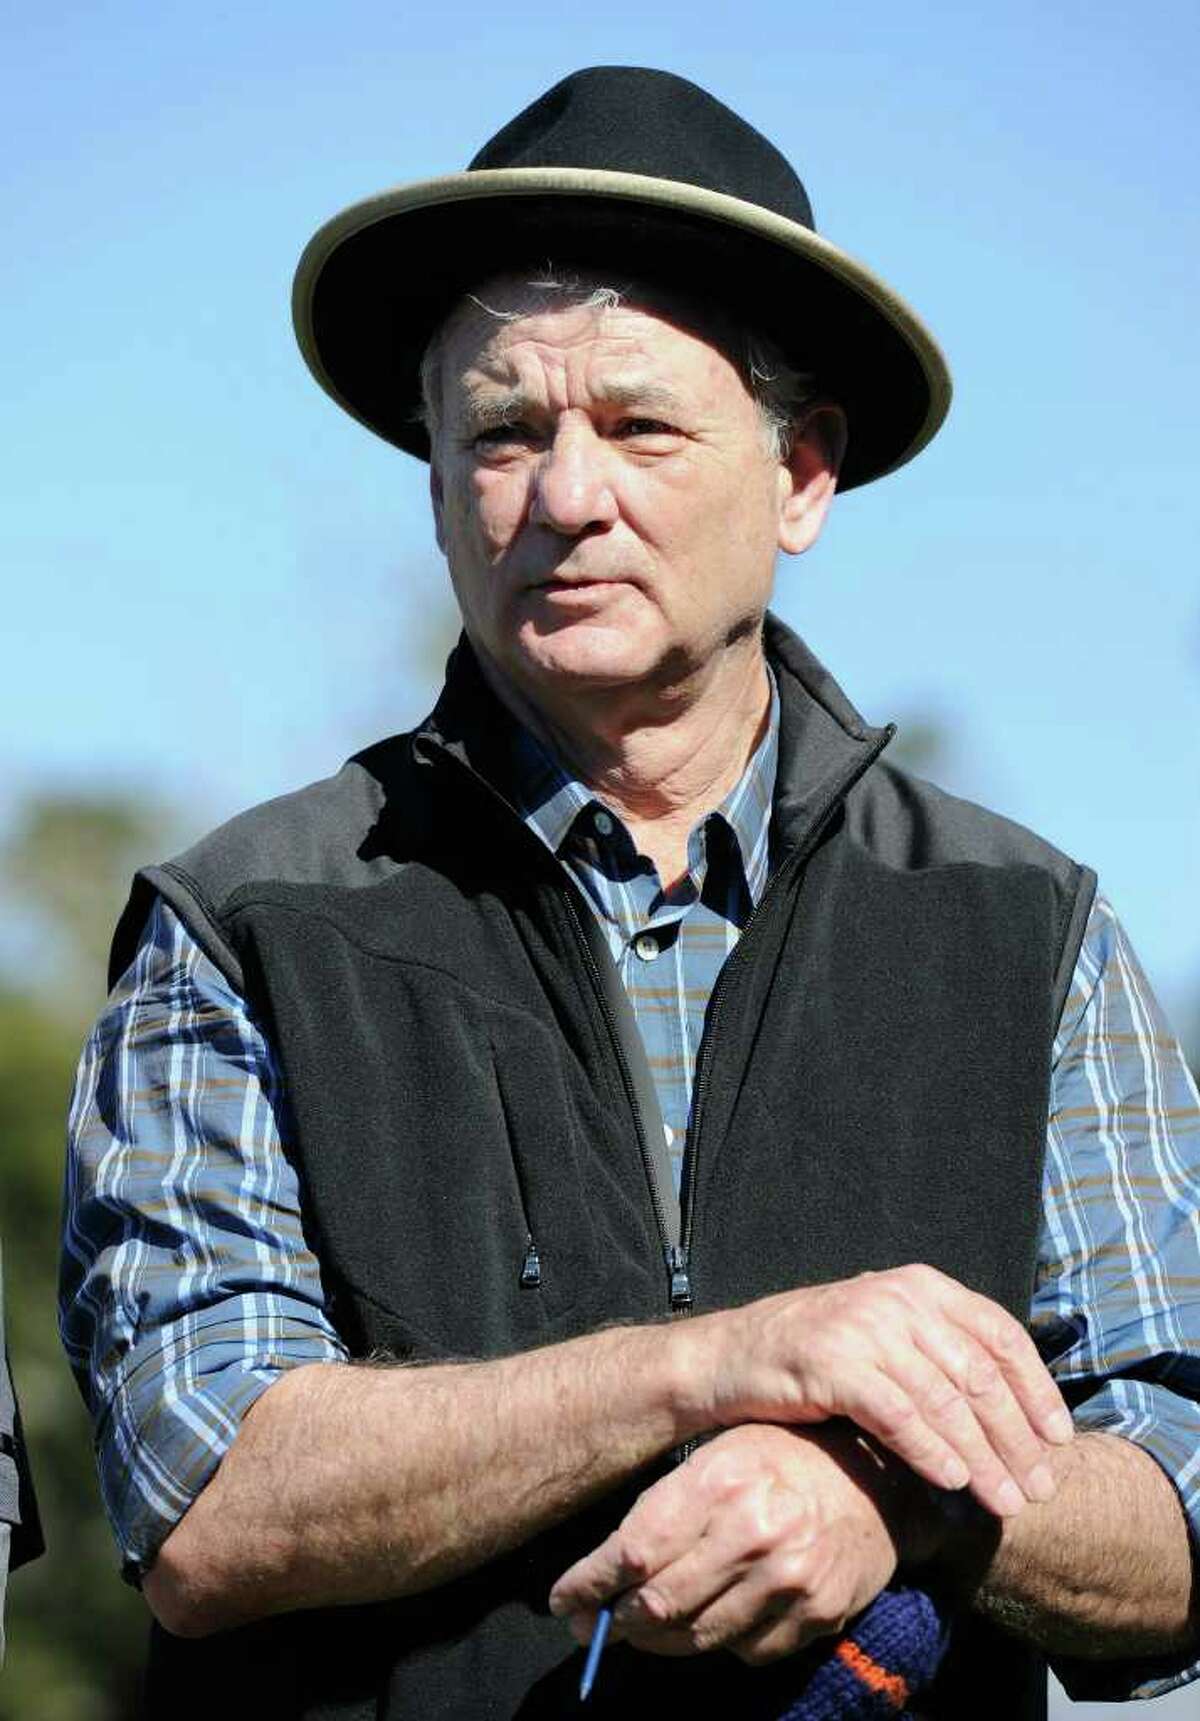 PEBBLE BEACH, CA - FEBRUARY 09: Actor Bill Murray ponders a shot during the 3M Celebrity Challenge at the AT&T Pebble Beach National Pro-Am at Pebble Beach Golf Links on February 9, 2011 in Pebble Beach, California. (Photo by Stuart Franklin/Getty Images)